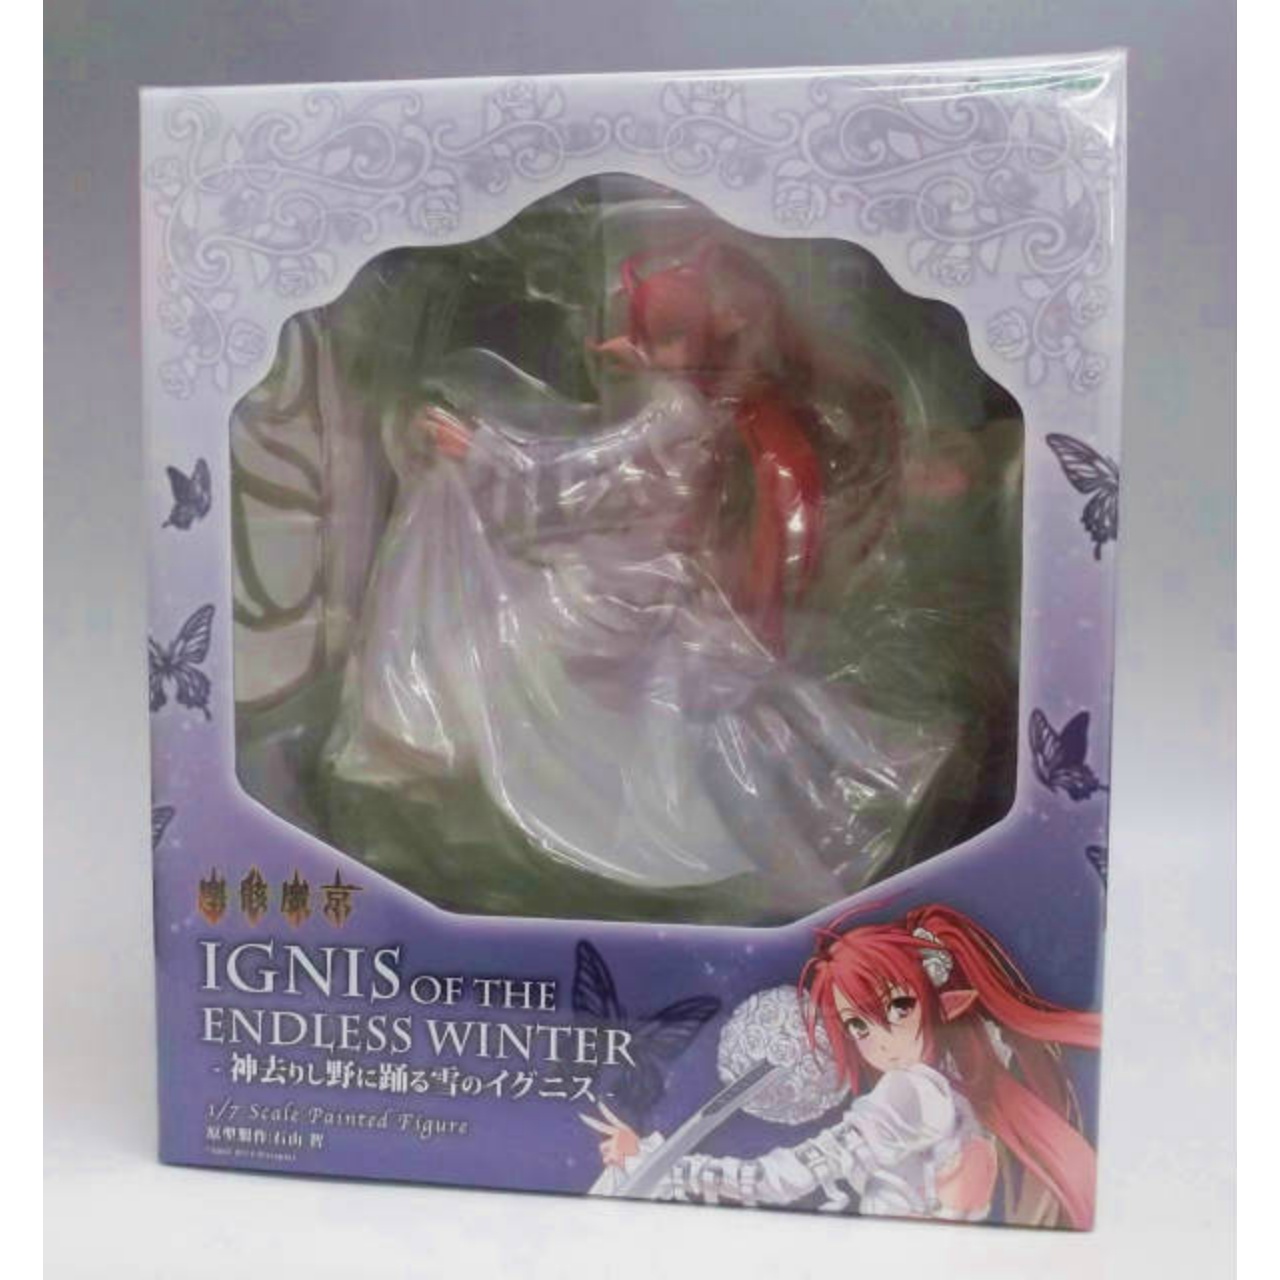 Orchid Seed Jingai Makyo Ignis of the Endless Winter 1/7 PVC